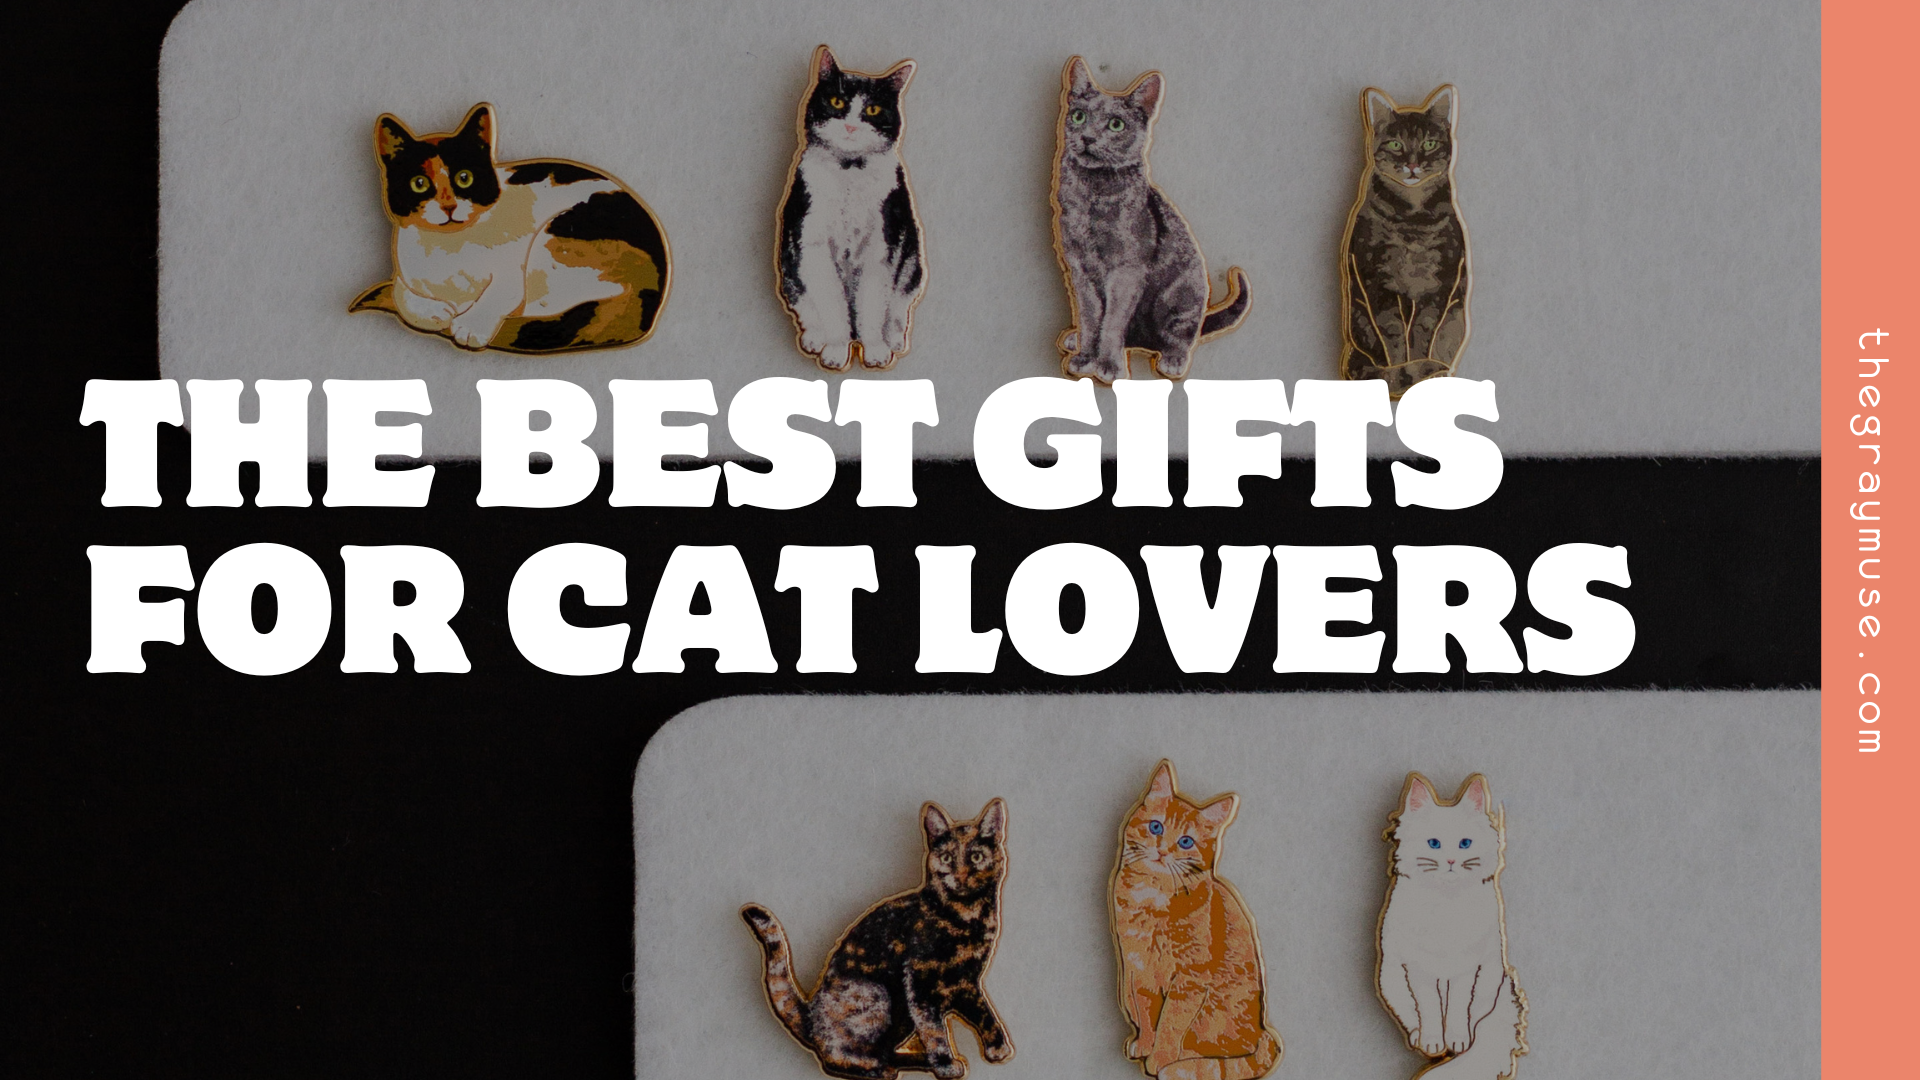 The Best Gifts for Cat Lovers